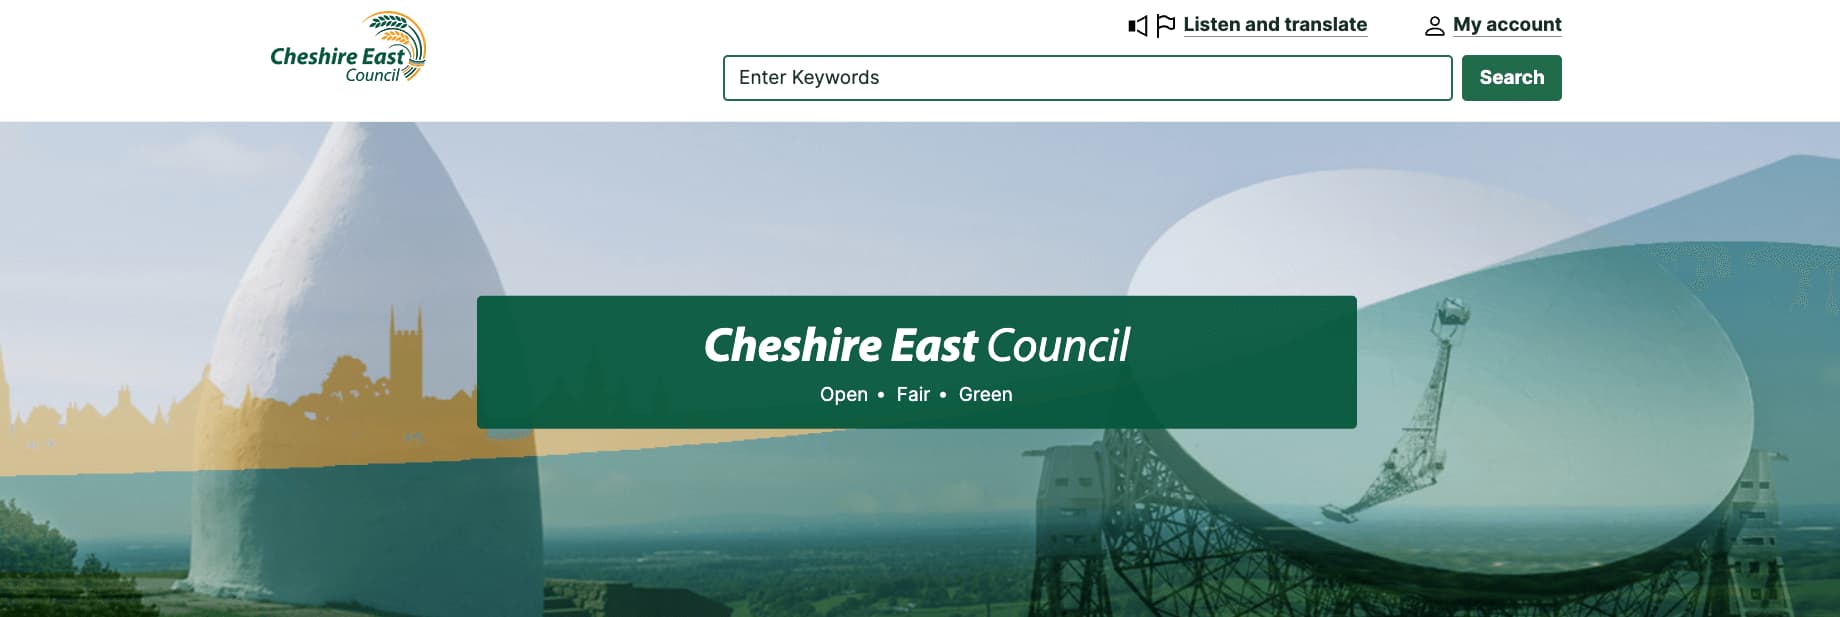 Cheshire east council navigation menu for SEO and web design